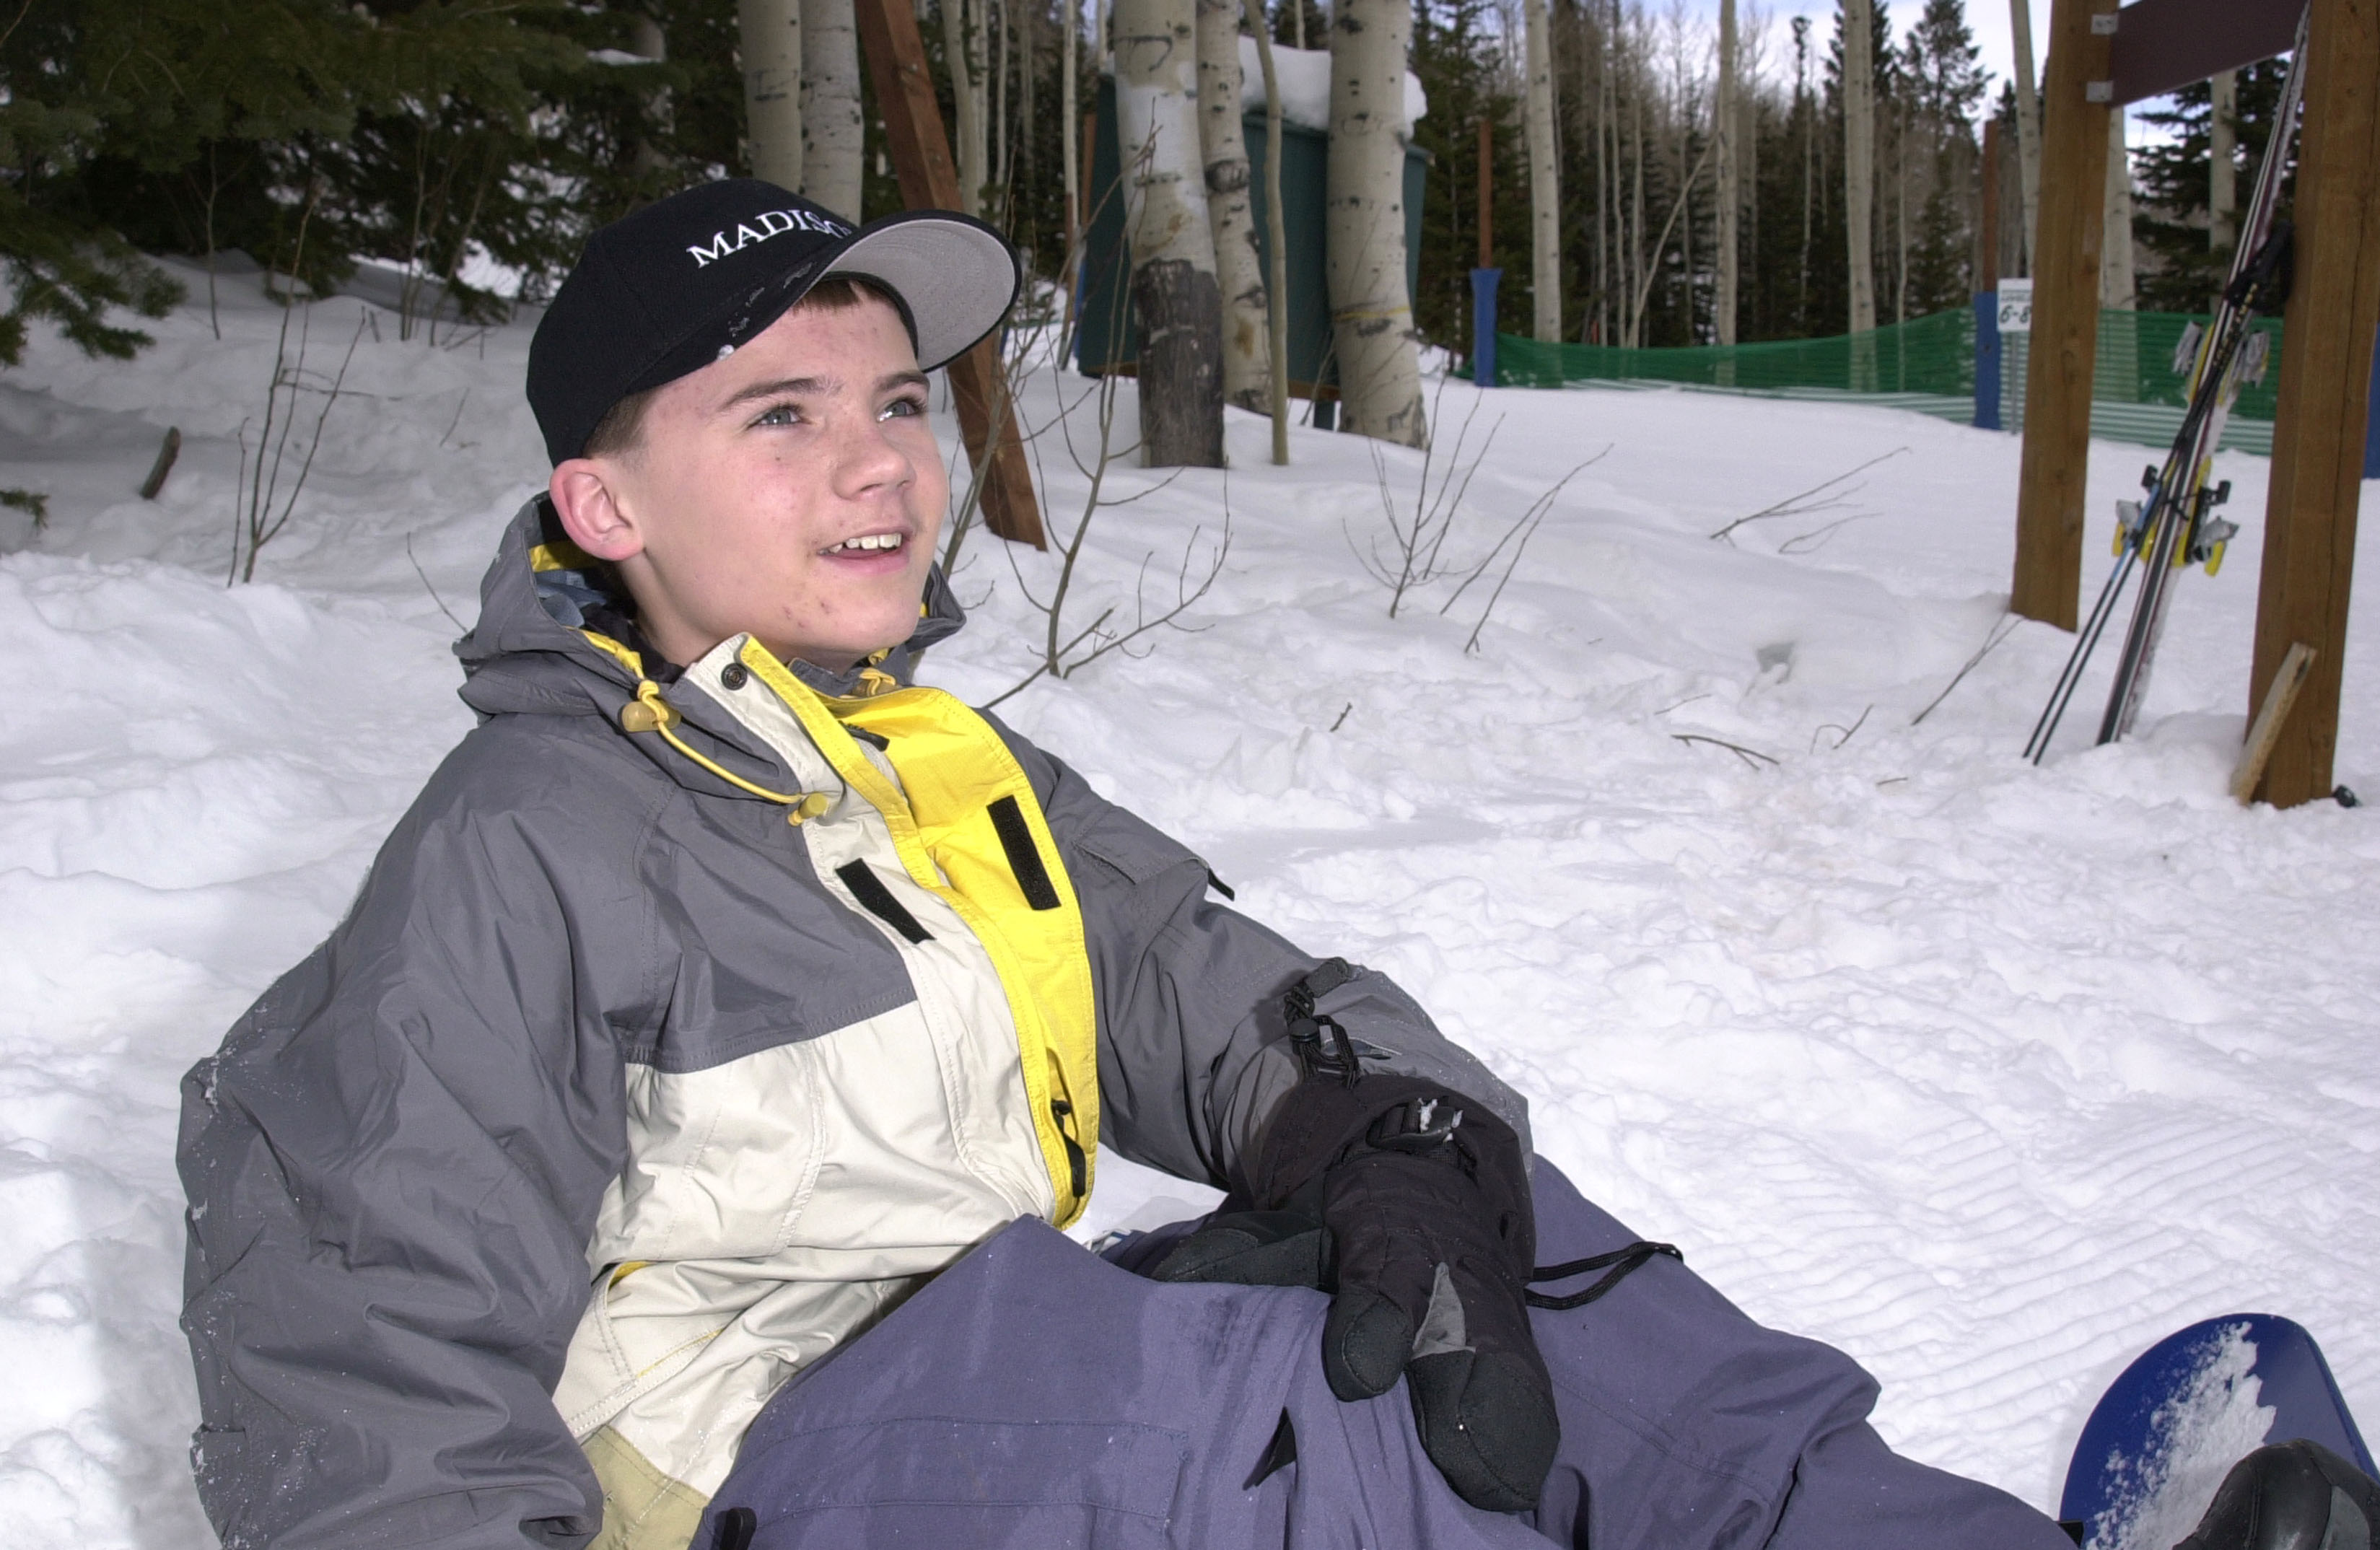 Jake Lloyd during Sundance 2001 in Park City, Utah, United States. | Source: Getty Images